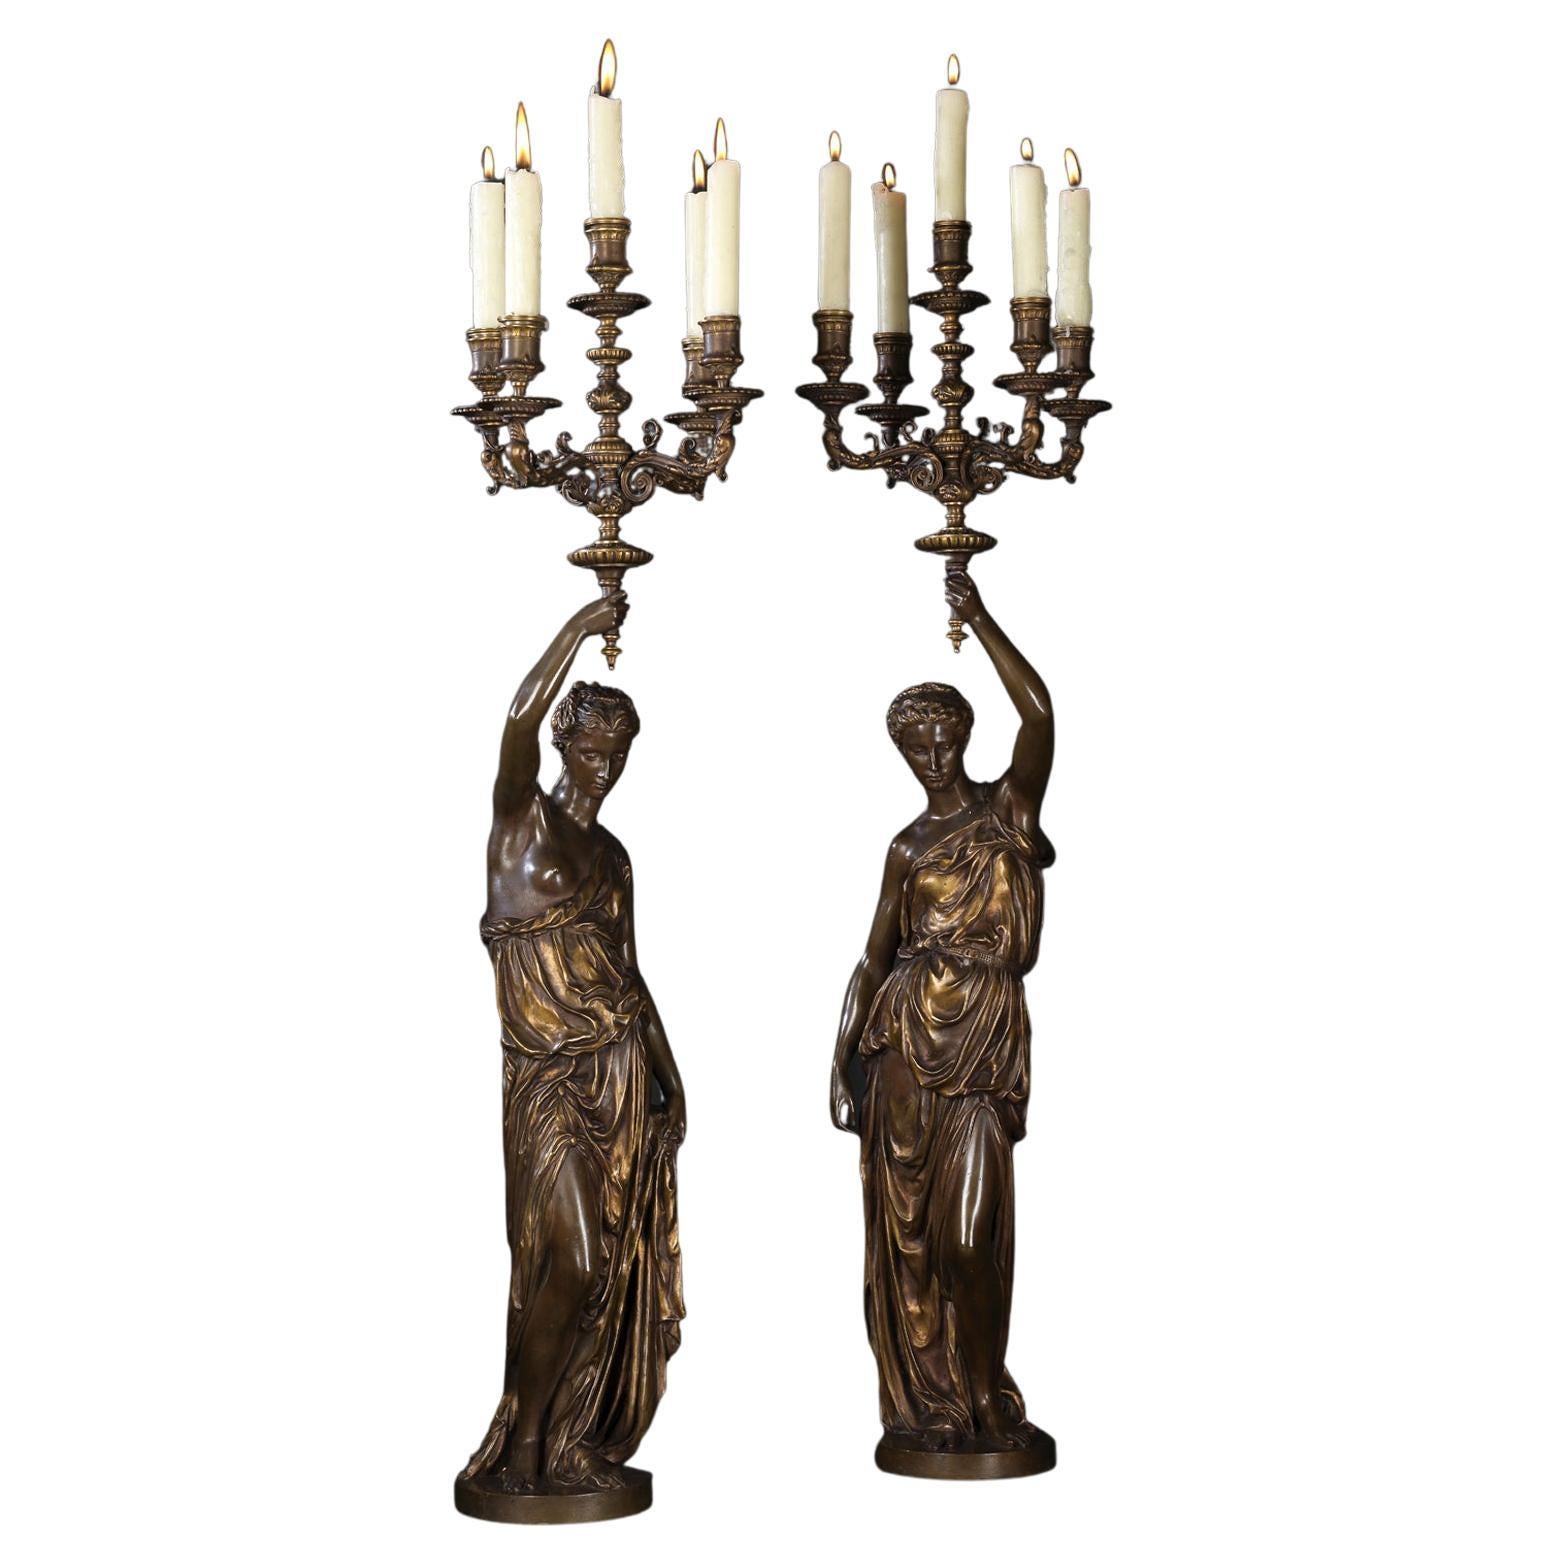 Pair of Gilt and Patinated Bronze Candelabra by Ferdinand Barbedienne